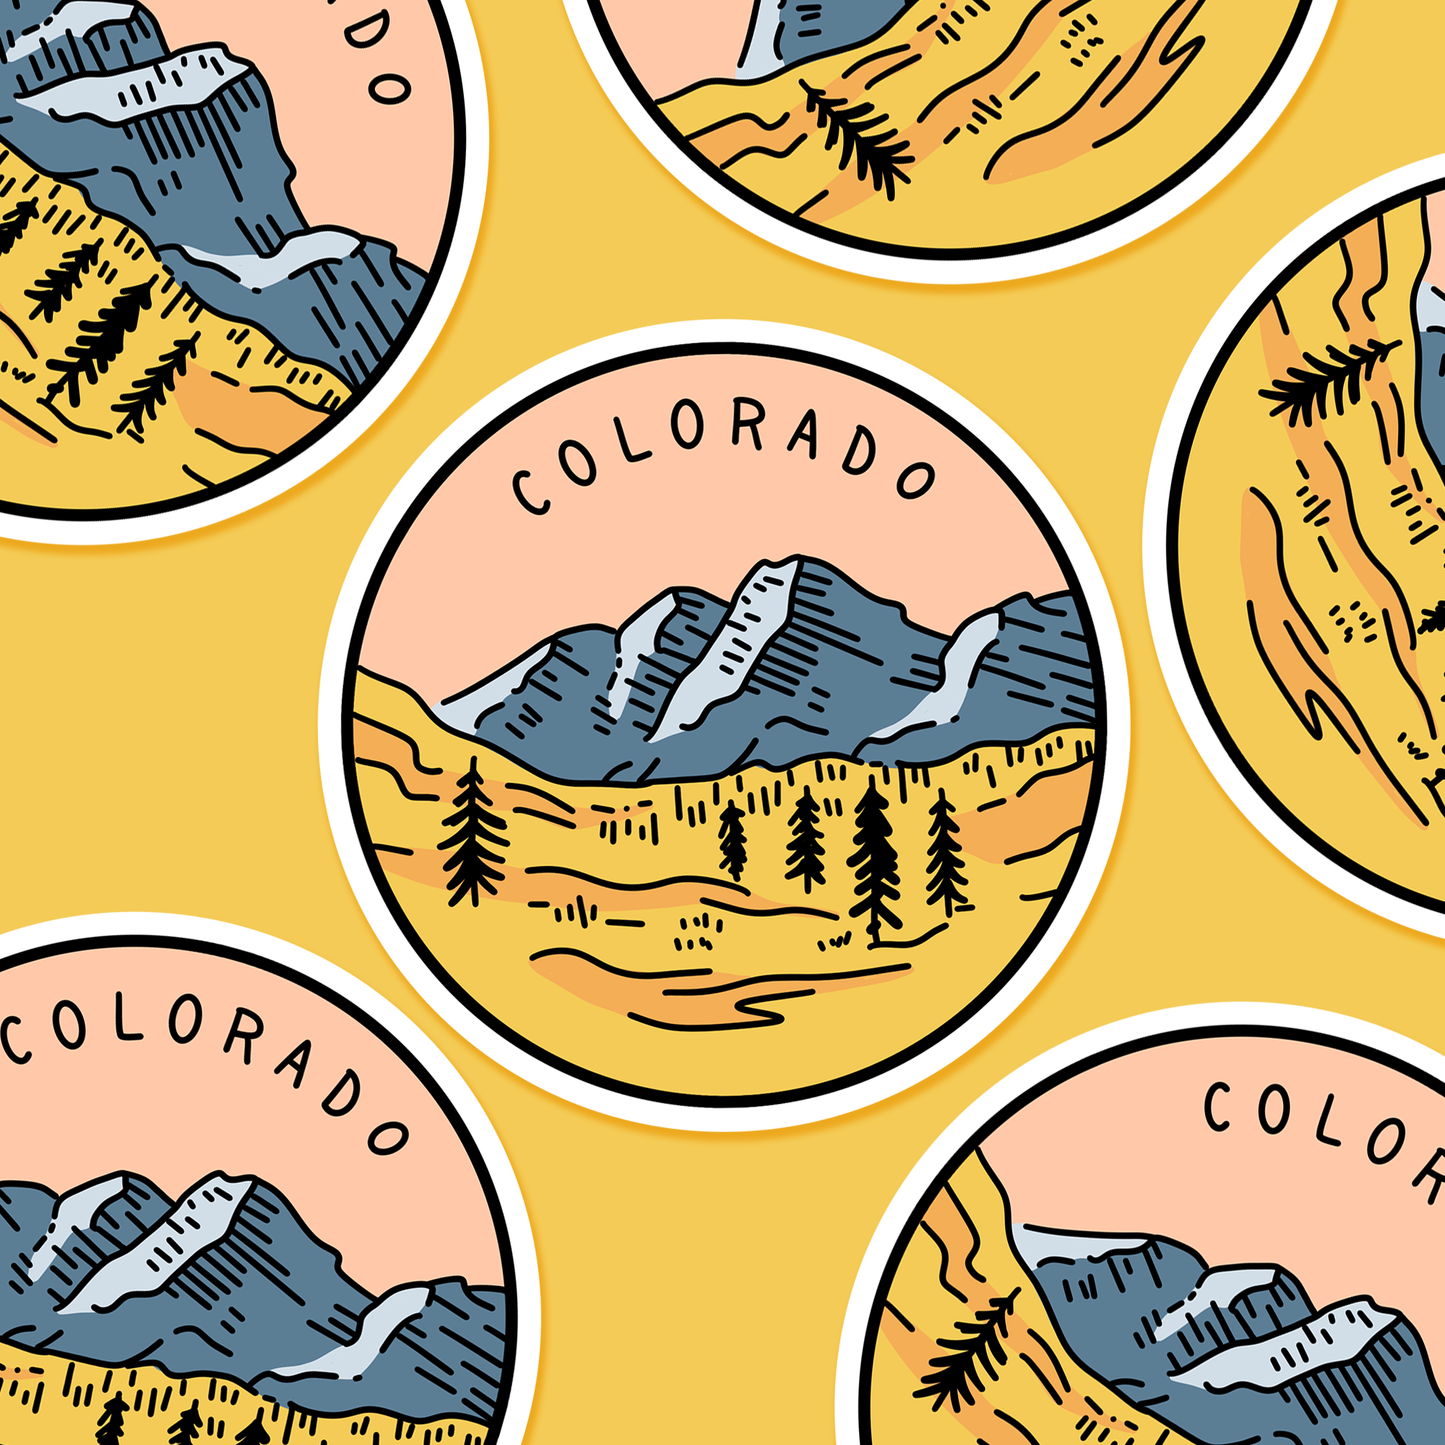 Colorado Illustrated US State 3 x 3 in - Travel Sticker